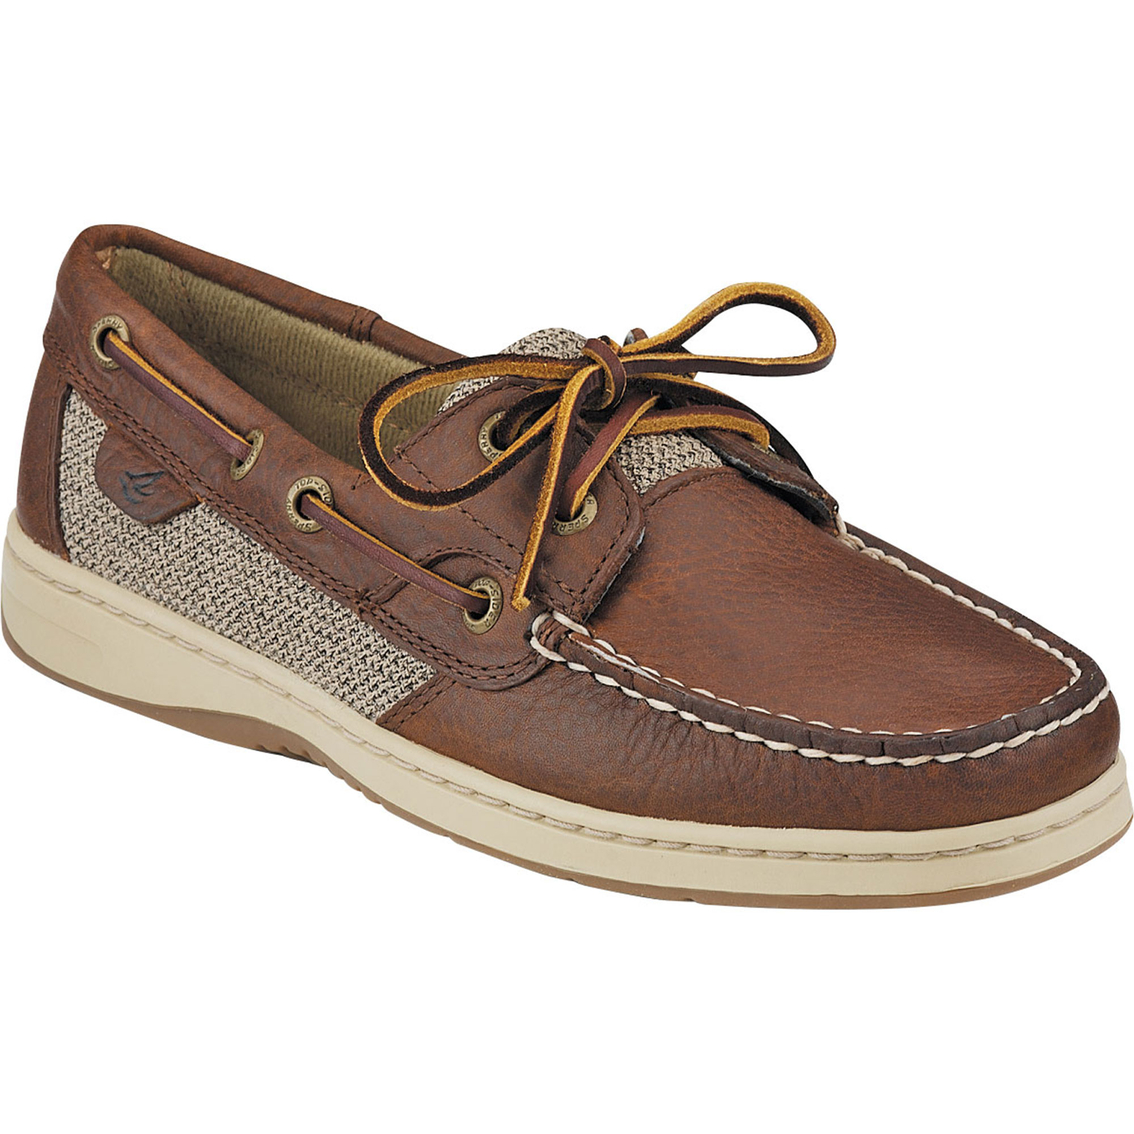 Sperry Women's Bluefish 2-eye Boat Shoes | Casuals | Shoes | Shop The ...